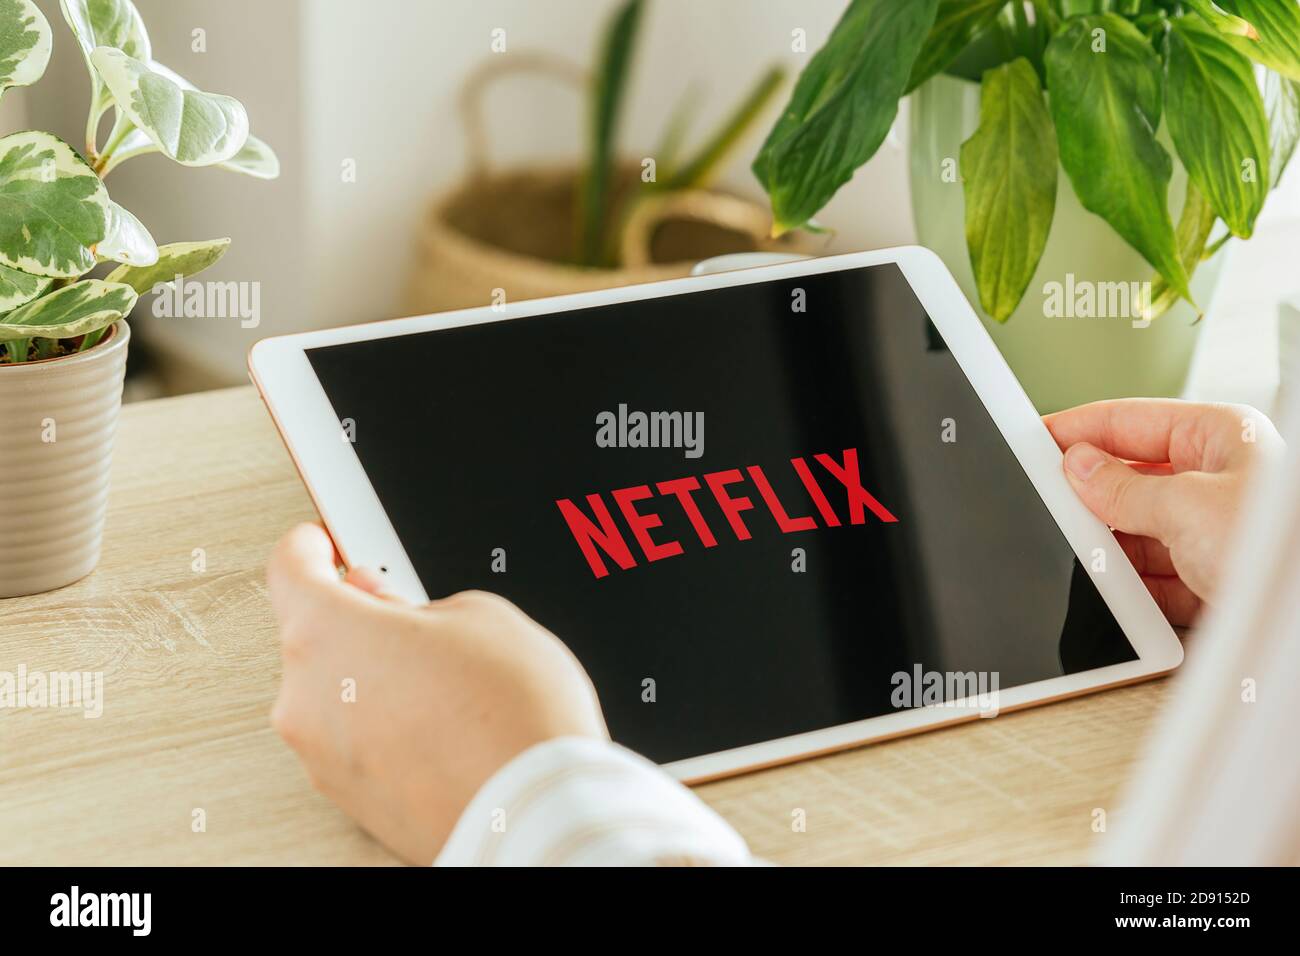 VALENCIA, SPAIN - OCTOBER, 2020: Netflix app on a tablet screen. Young Girl is watching On demand TV shows, Documentary, Series and Movies via tablet Stock Photo